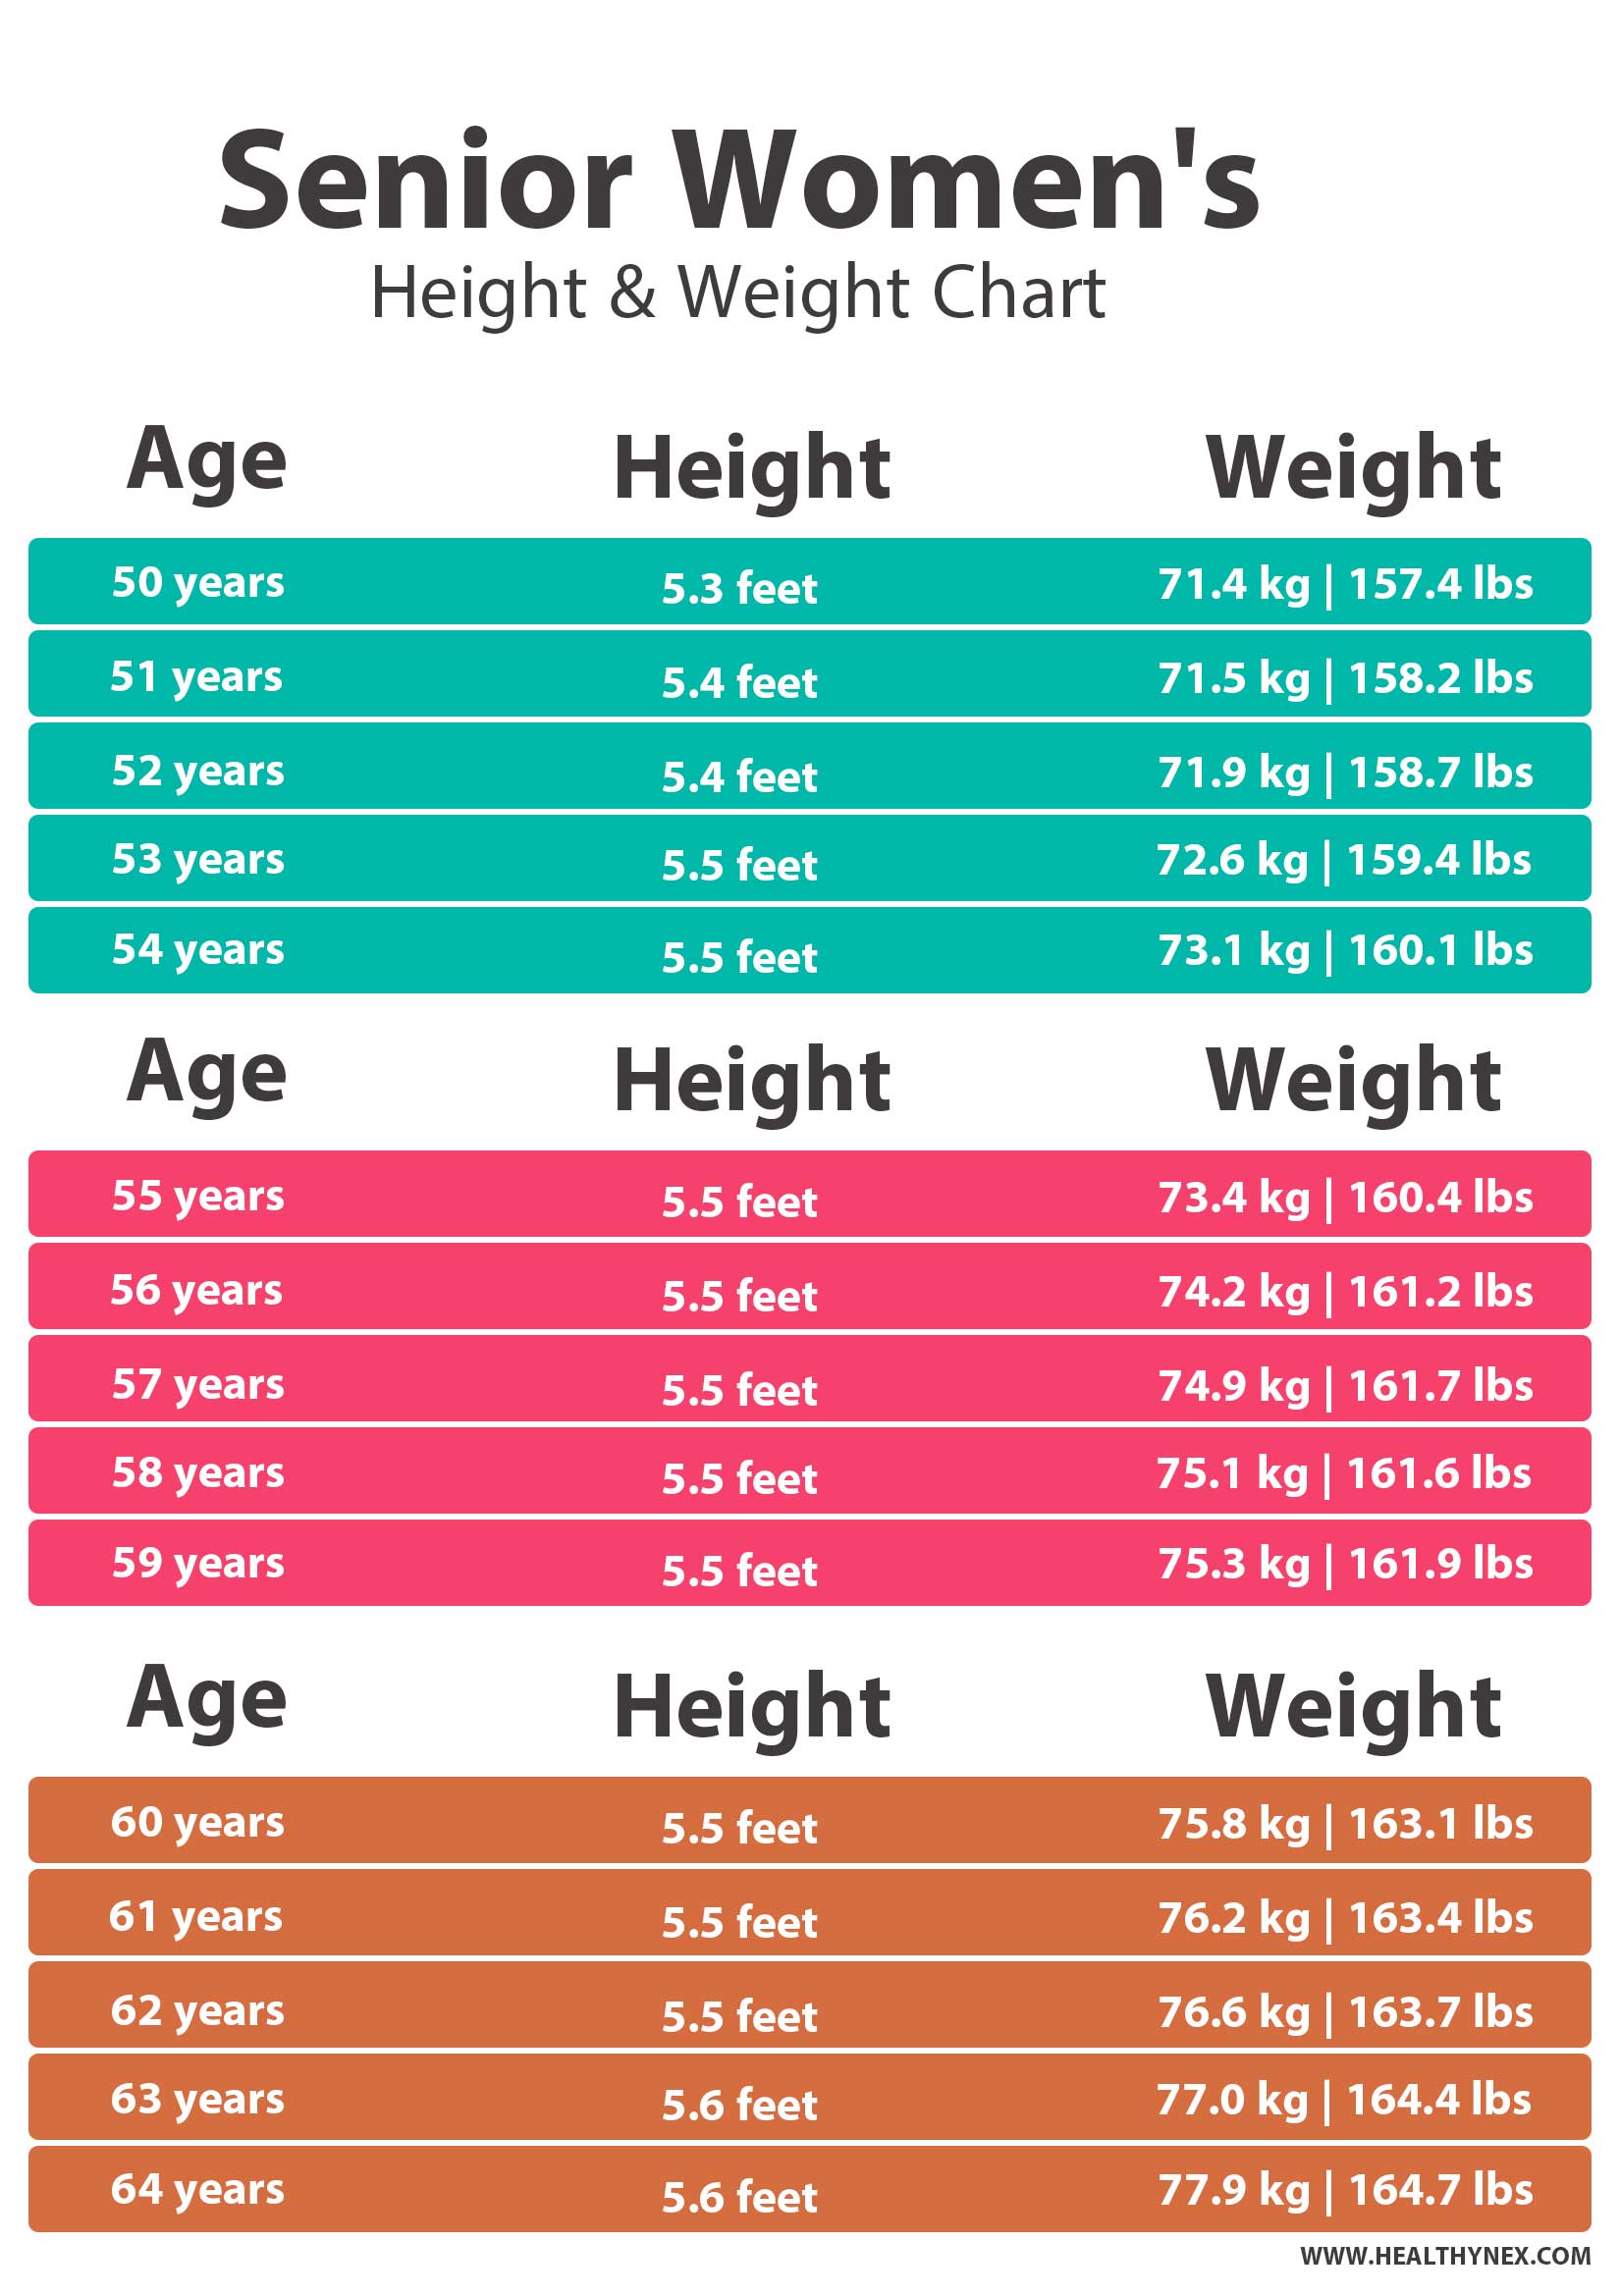 Average Height & Weight Chart for Seniors Females by age in kg